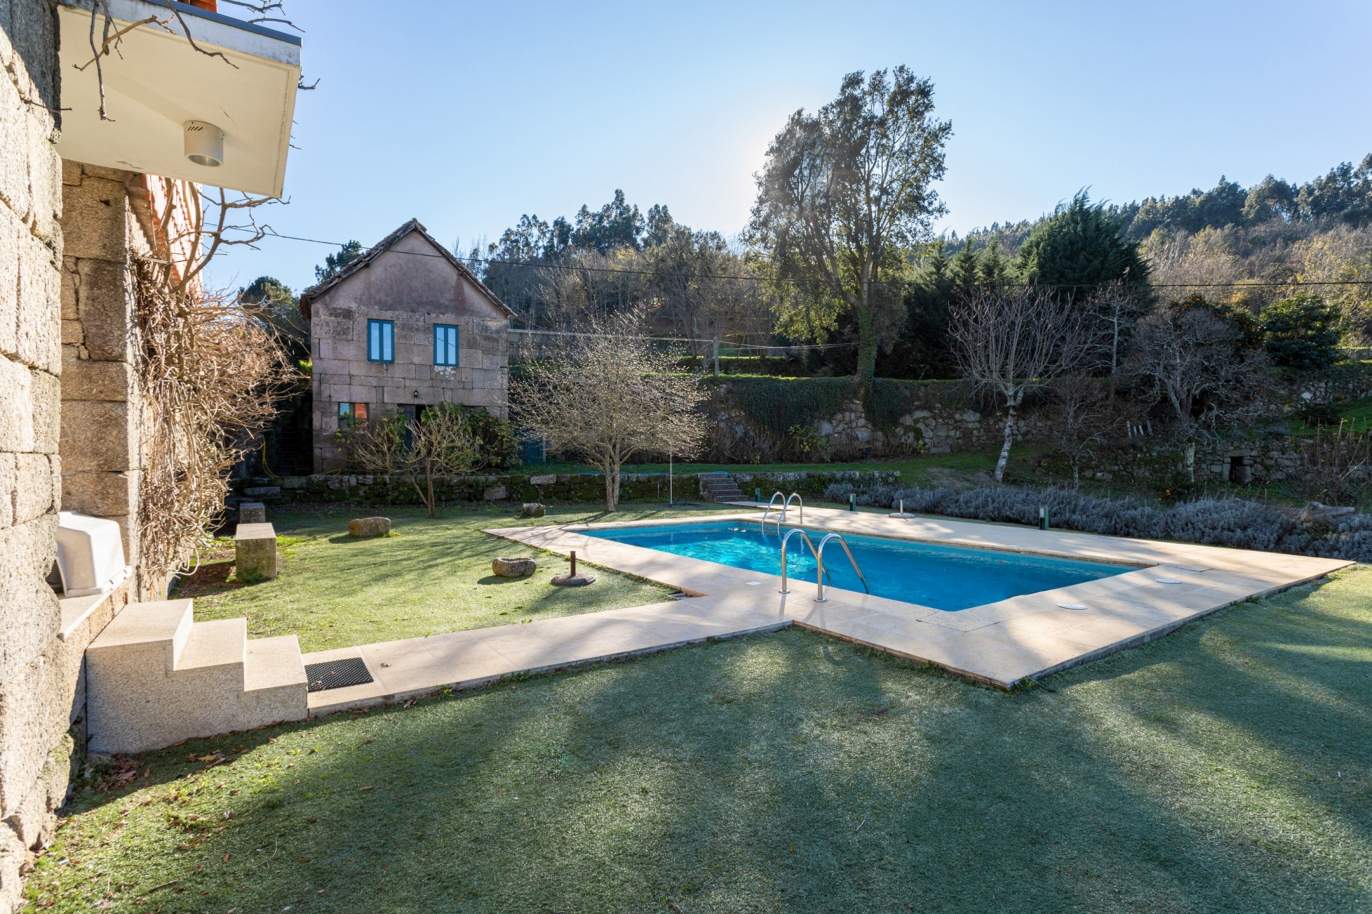 Selling: Property with pool and gardens, in the Douro Region, Cinfães, North Portugal_189869